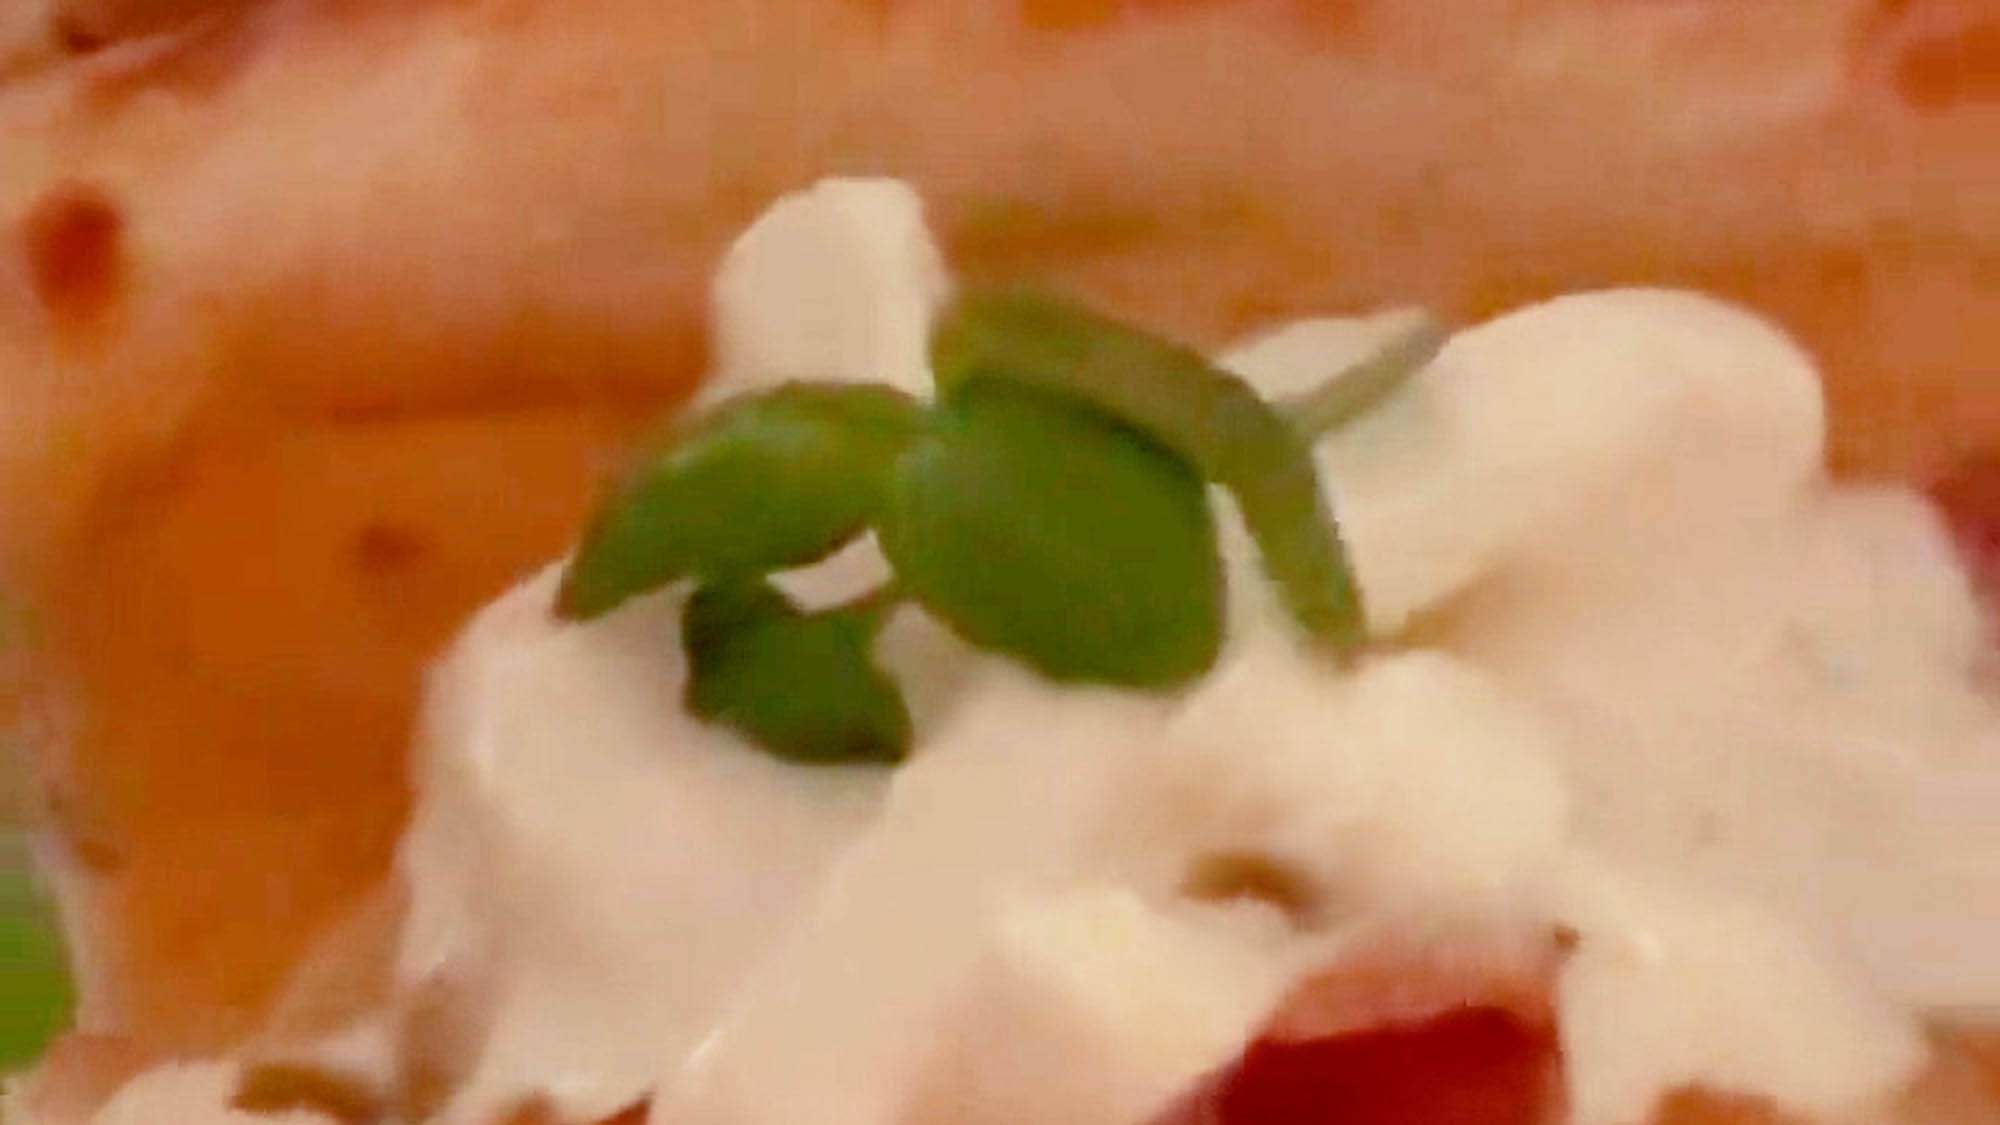 Shocked Diner Finds Live Caterpillar In His Pizza At Top Footballer’s Restaurant